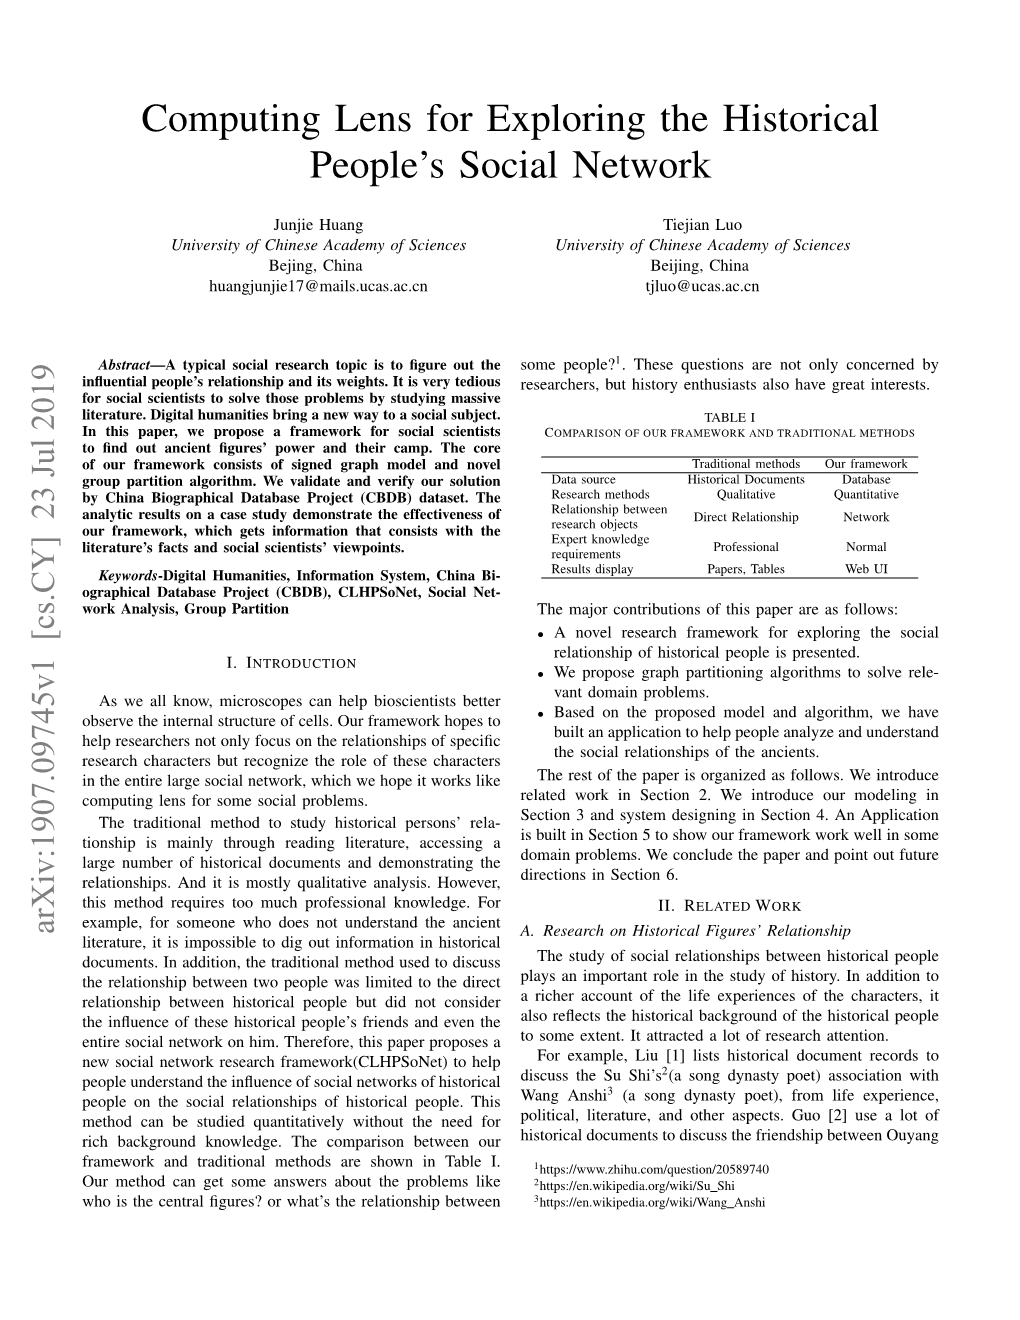 Computing Lens for Exploring the Historical People's Social Network